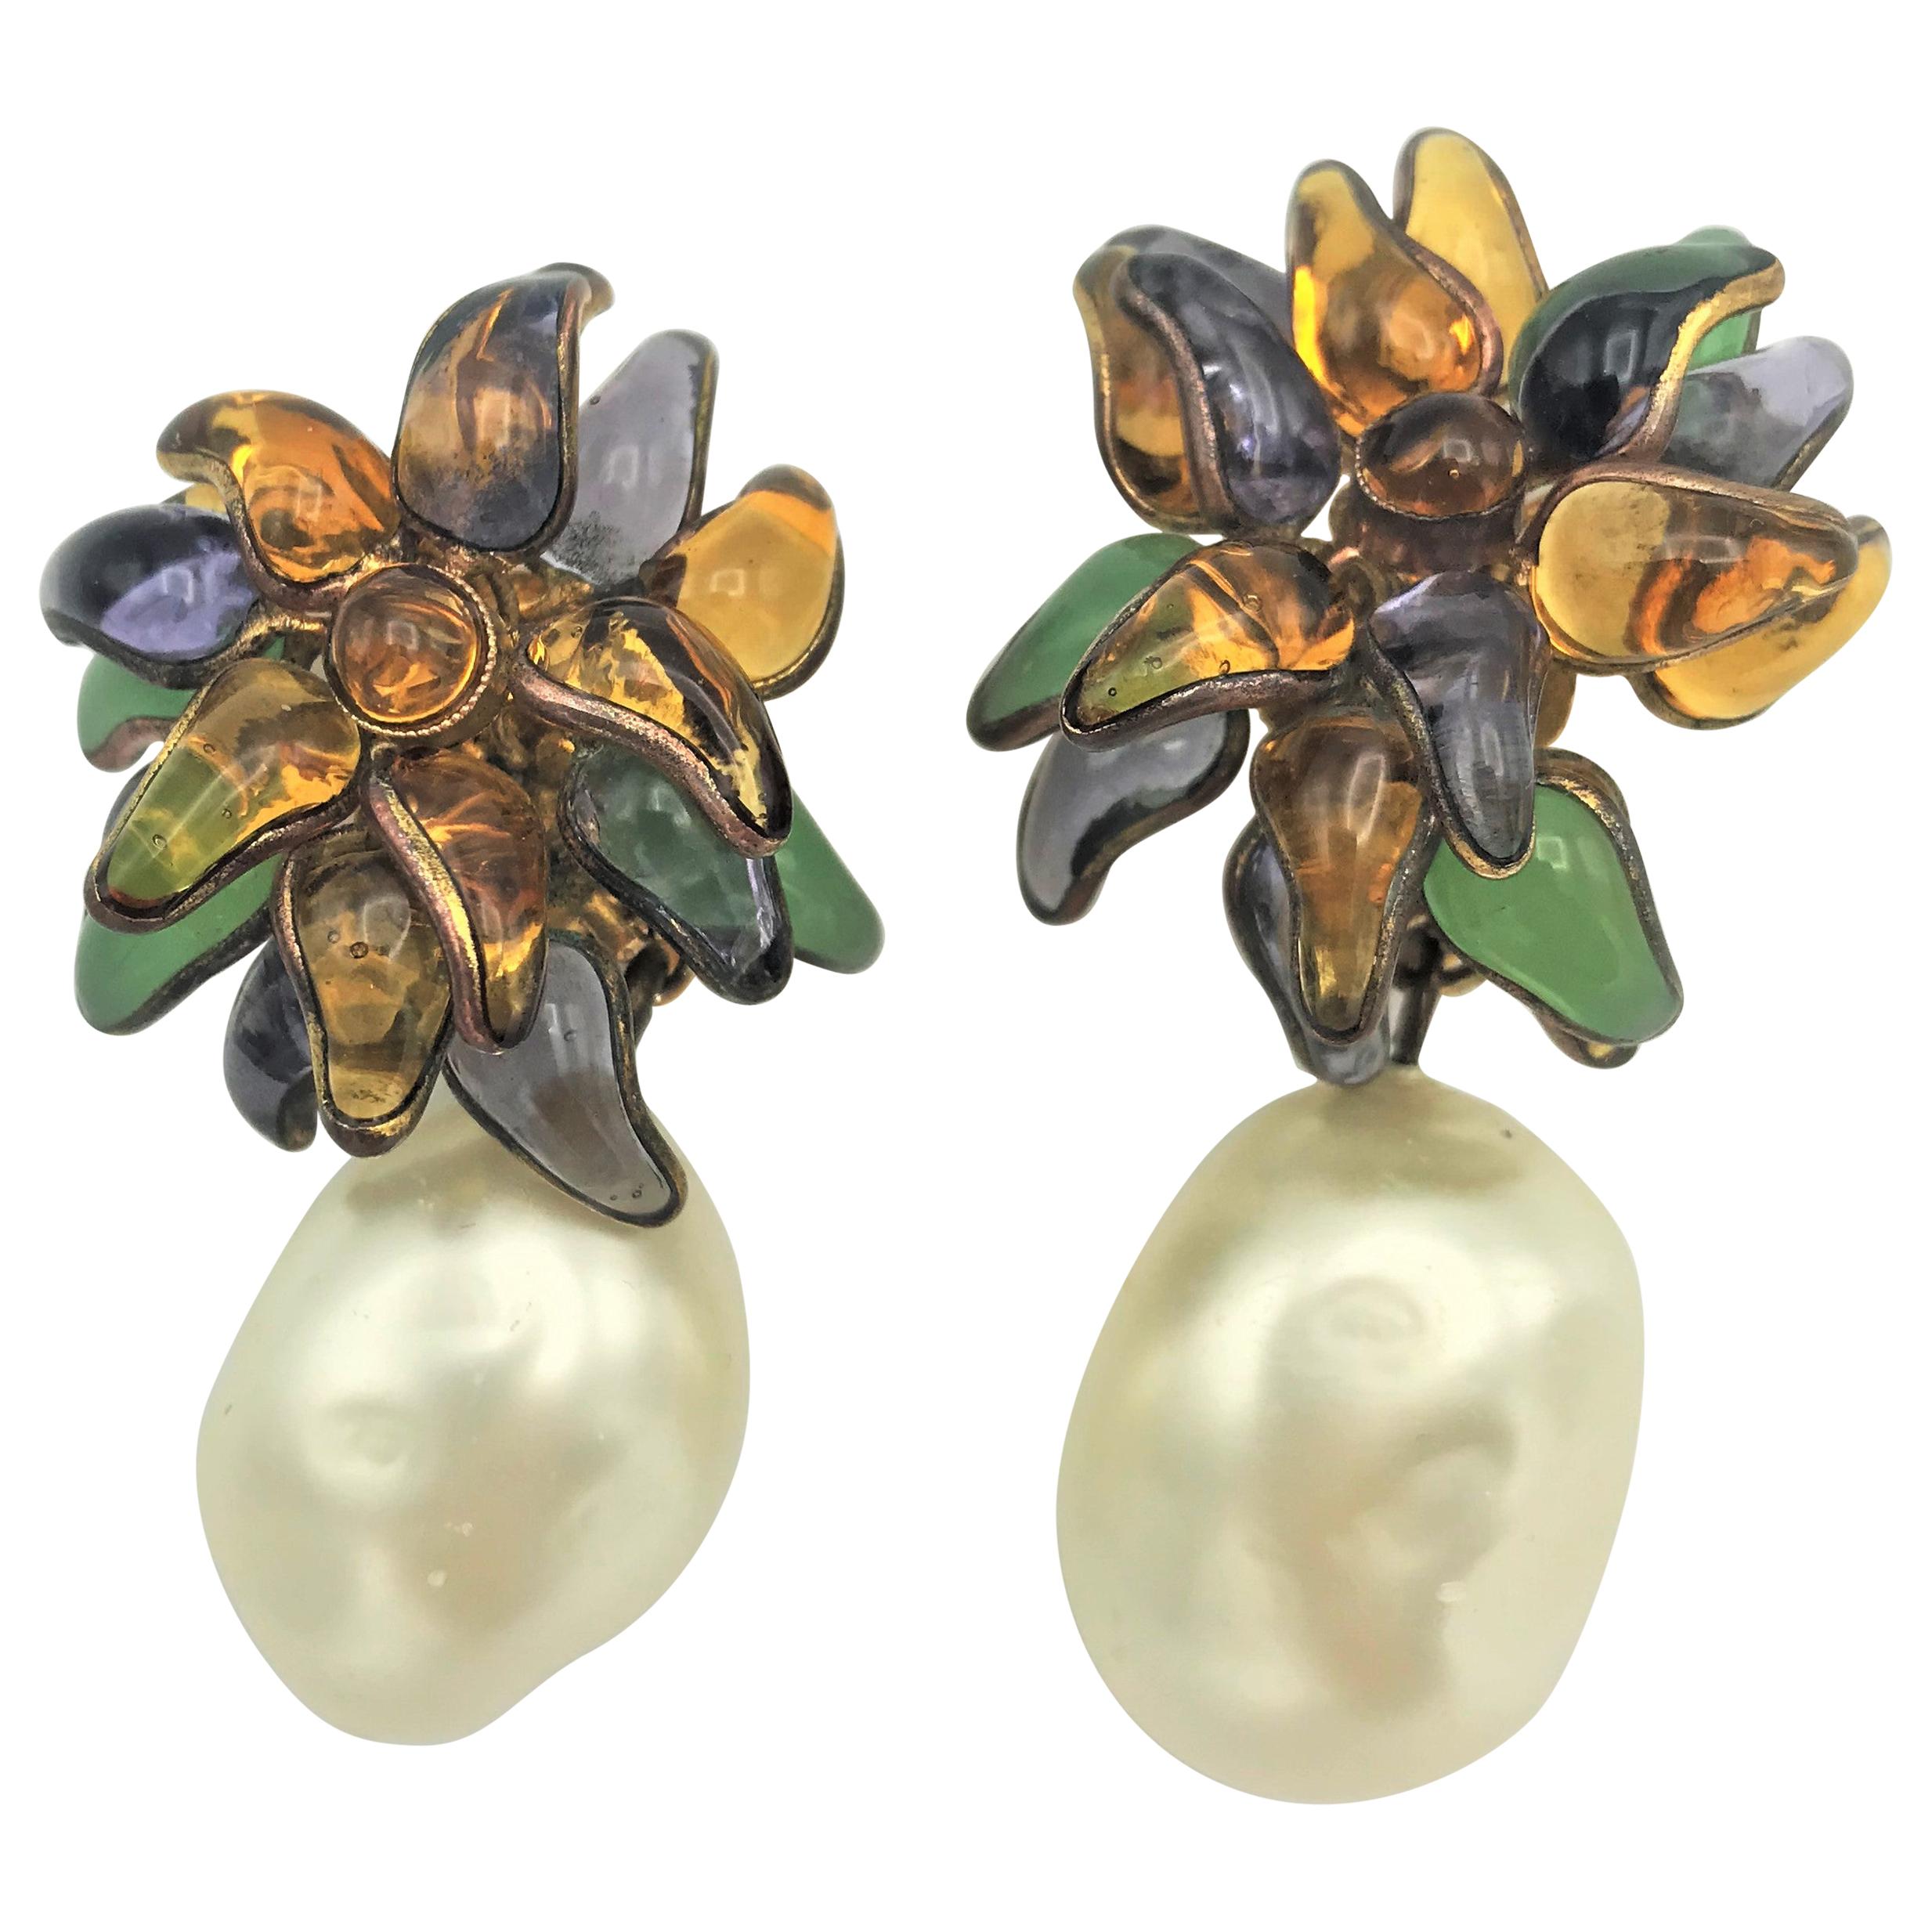 An extraordinary ear clip designed by Victoire de Castellane in 1984. The flower is handmade of pured glass with 17 small leaves in four different colors: purple, mint, yellow and brown. On the flower hangs a fantastic and huge faux pearl which is